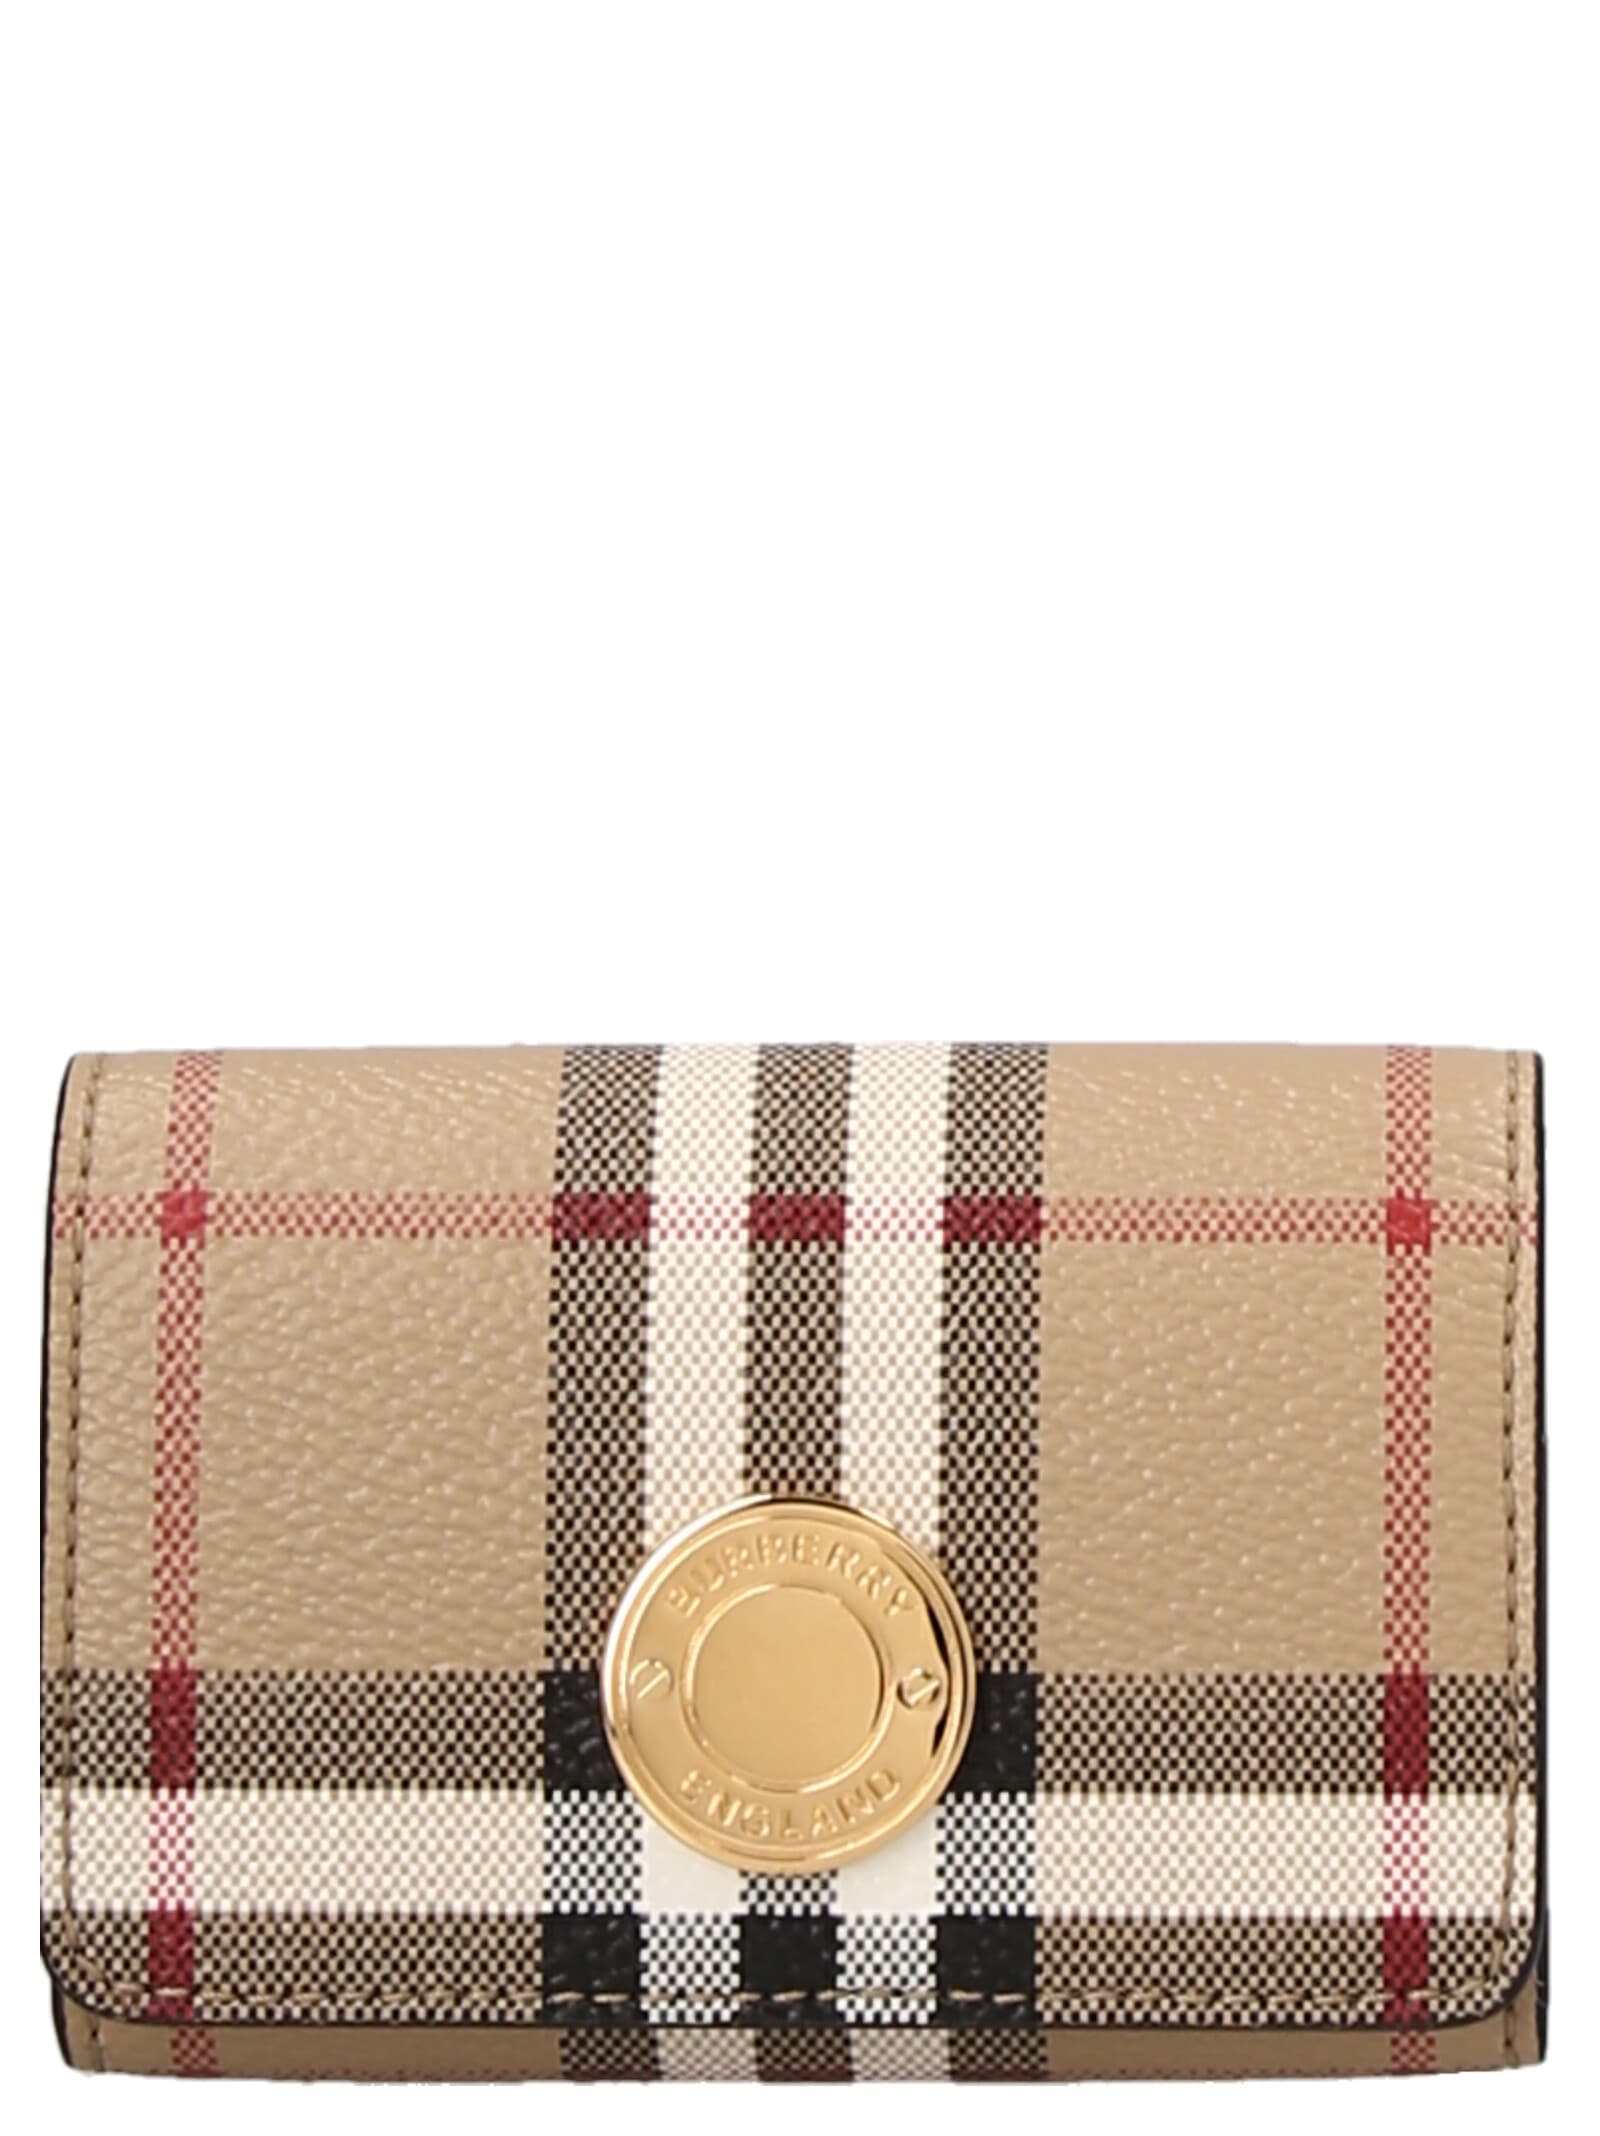 Burberry compact Wallet